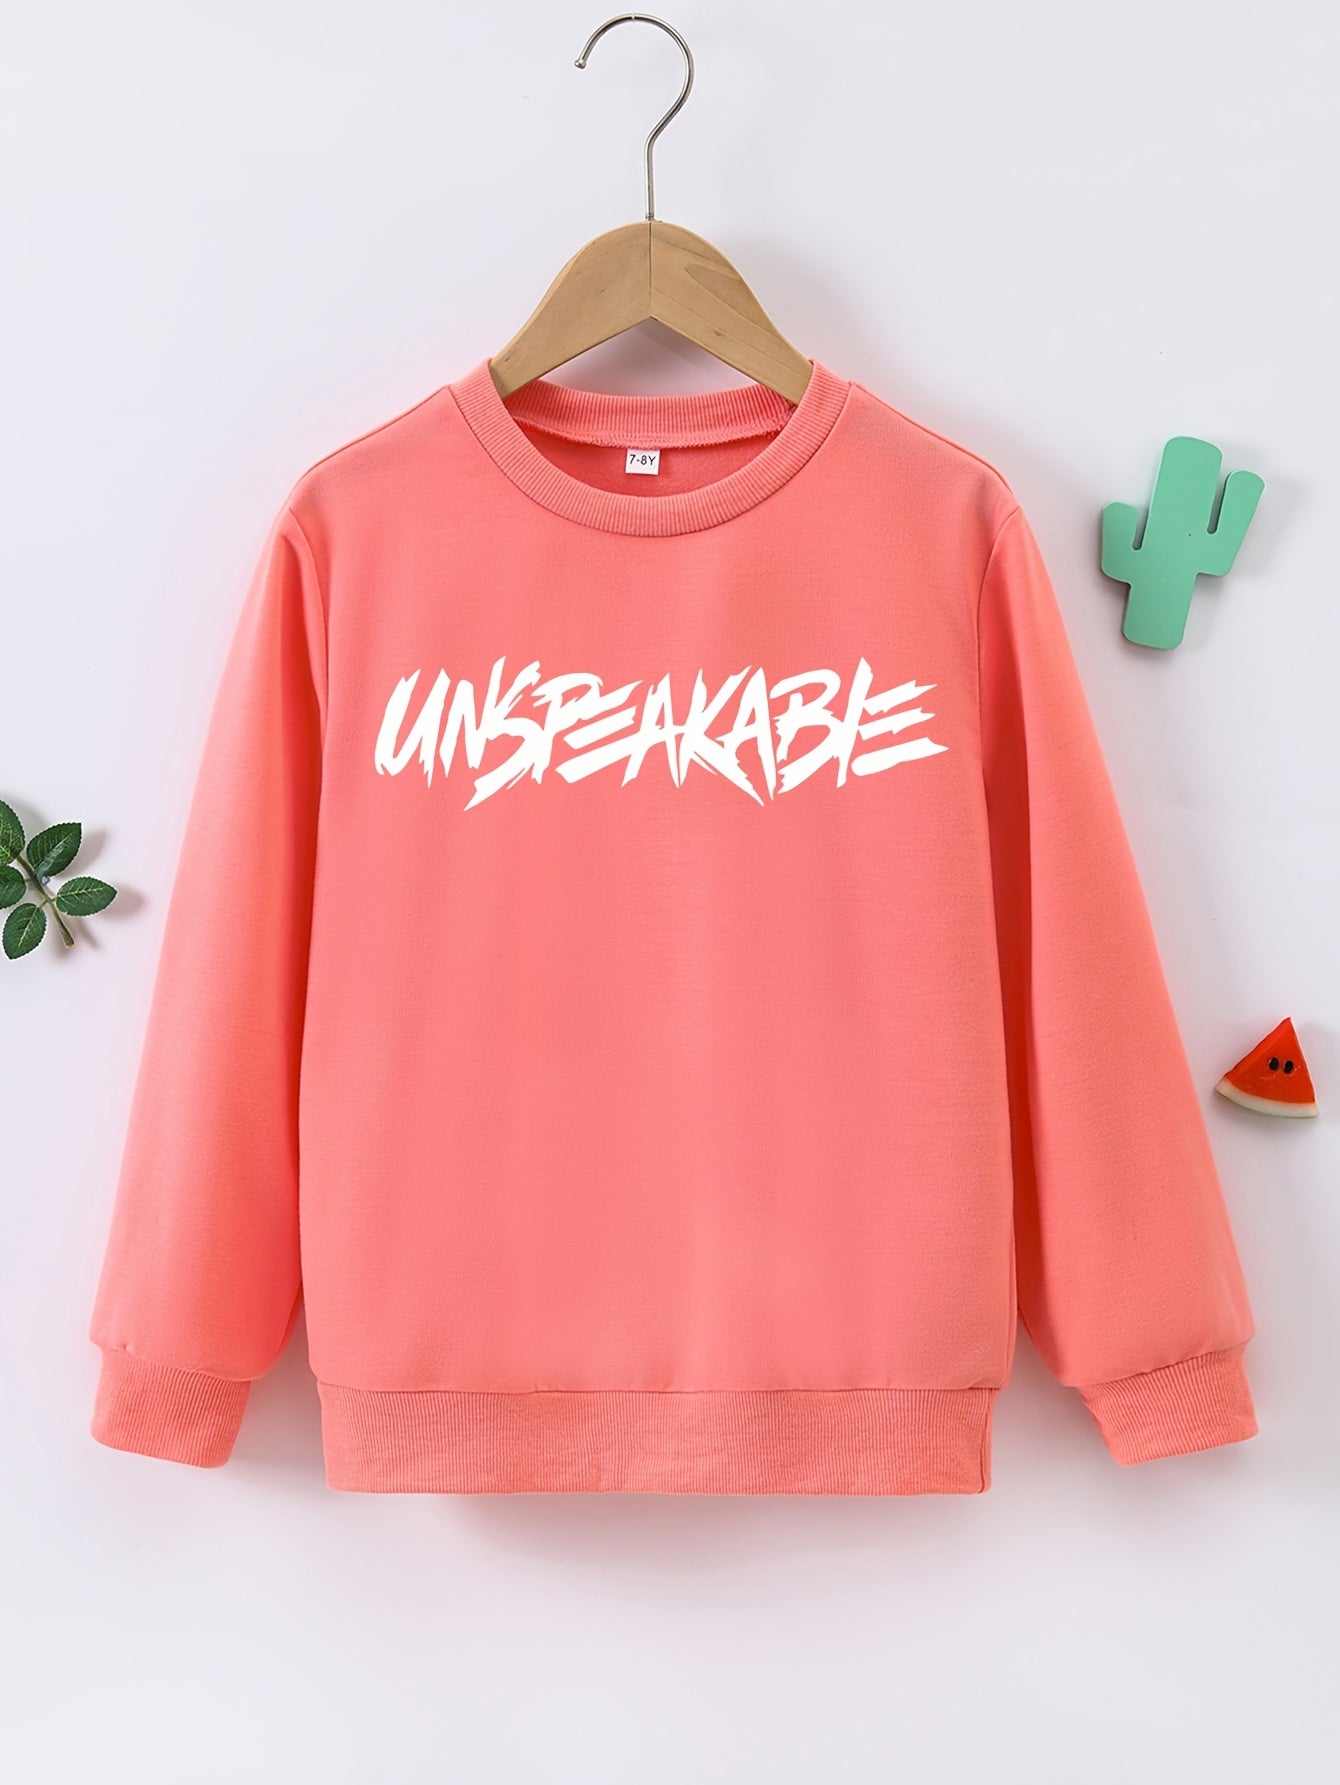 Trendy UNSPEAKABLE Letter Print Boys Casual Creative Pullover Sweatshirt, Long Sleeve Crew Neck Tops, Kids Clothing Outdoor